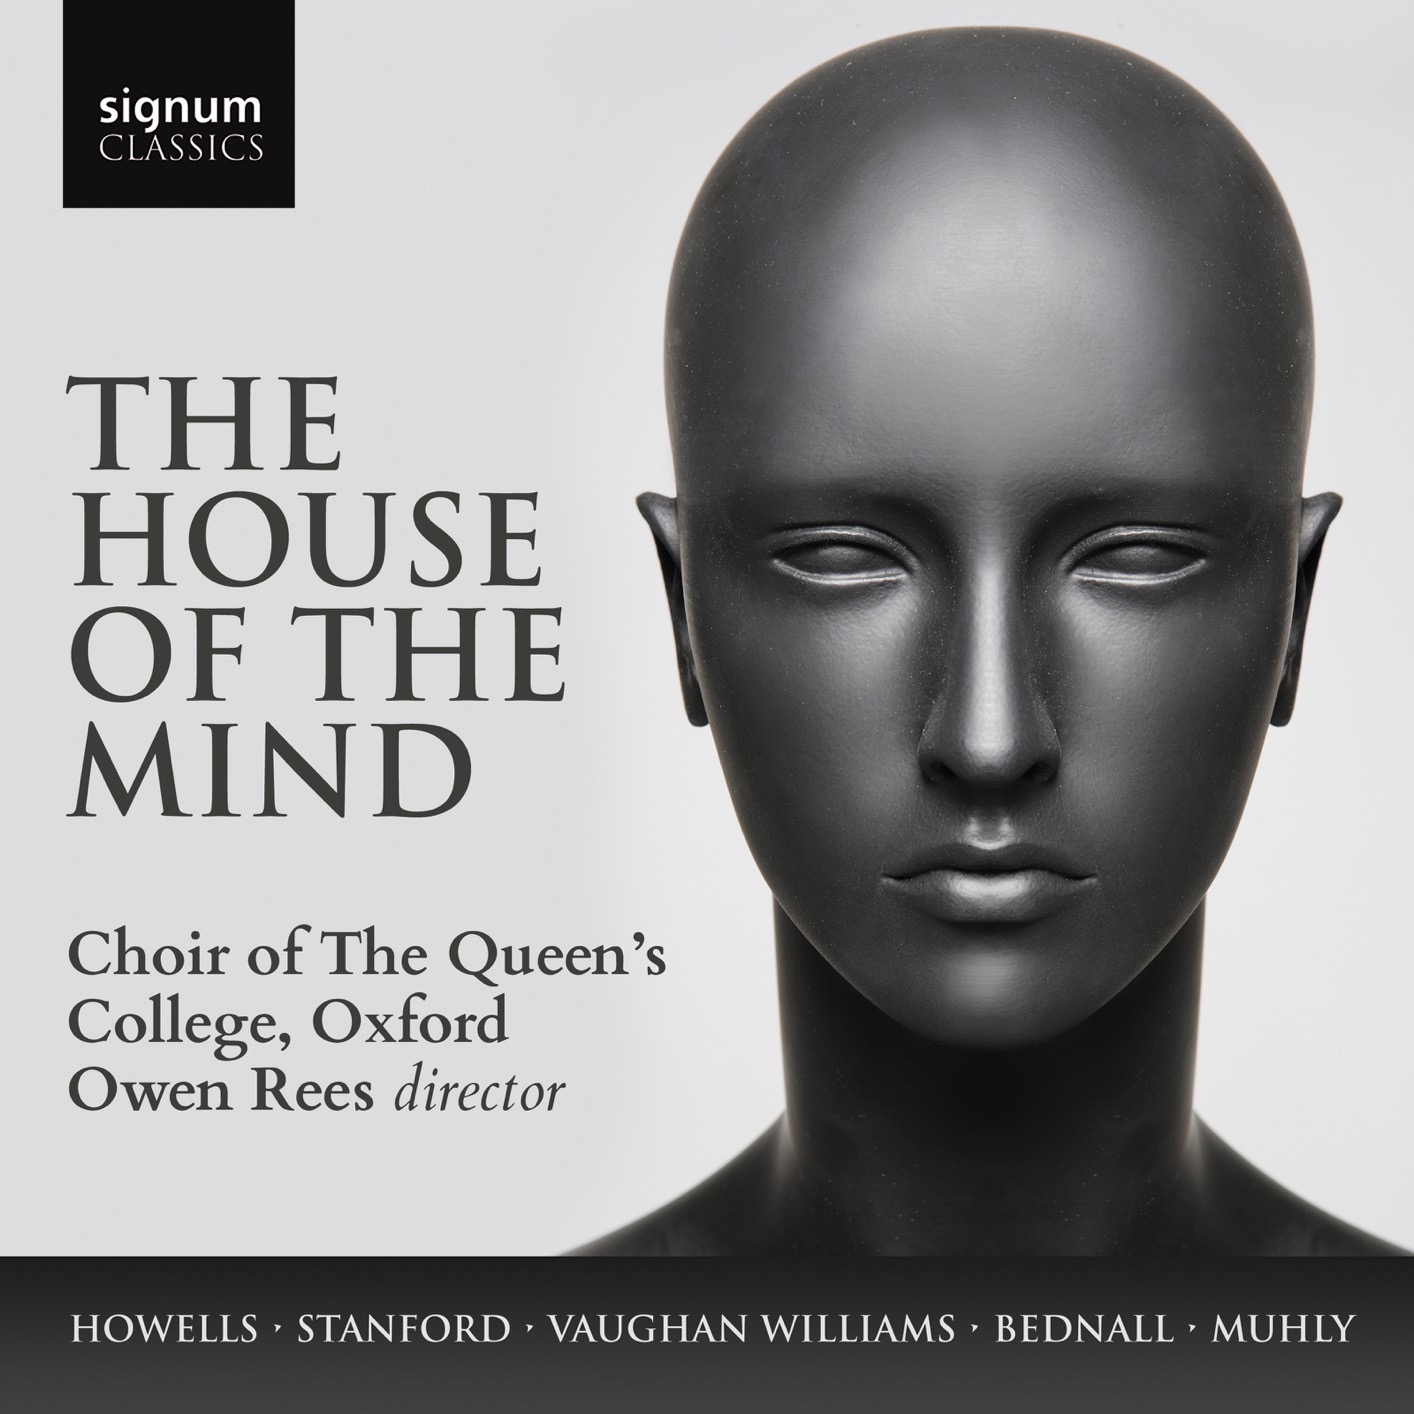 The Choir of the Queen’s College, Oxford & Owen Rees - The House of the Mind (2018) [FLAC 24bit/96kHz]